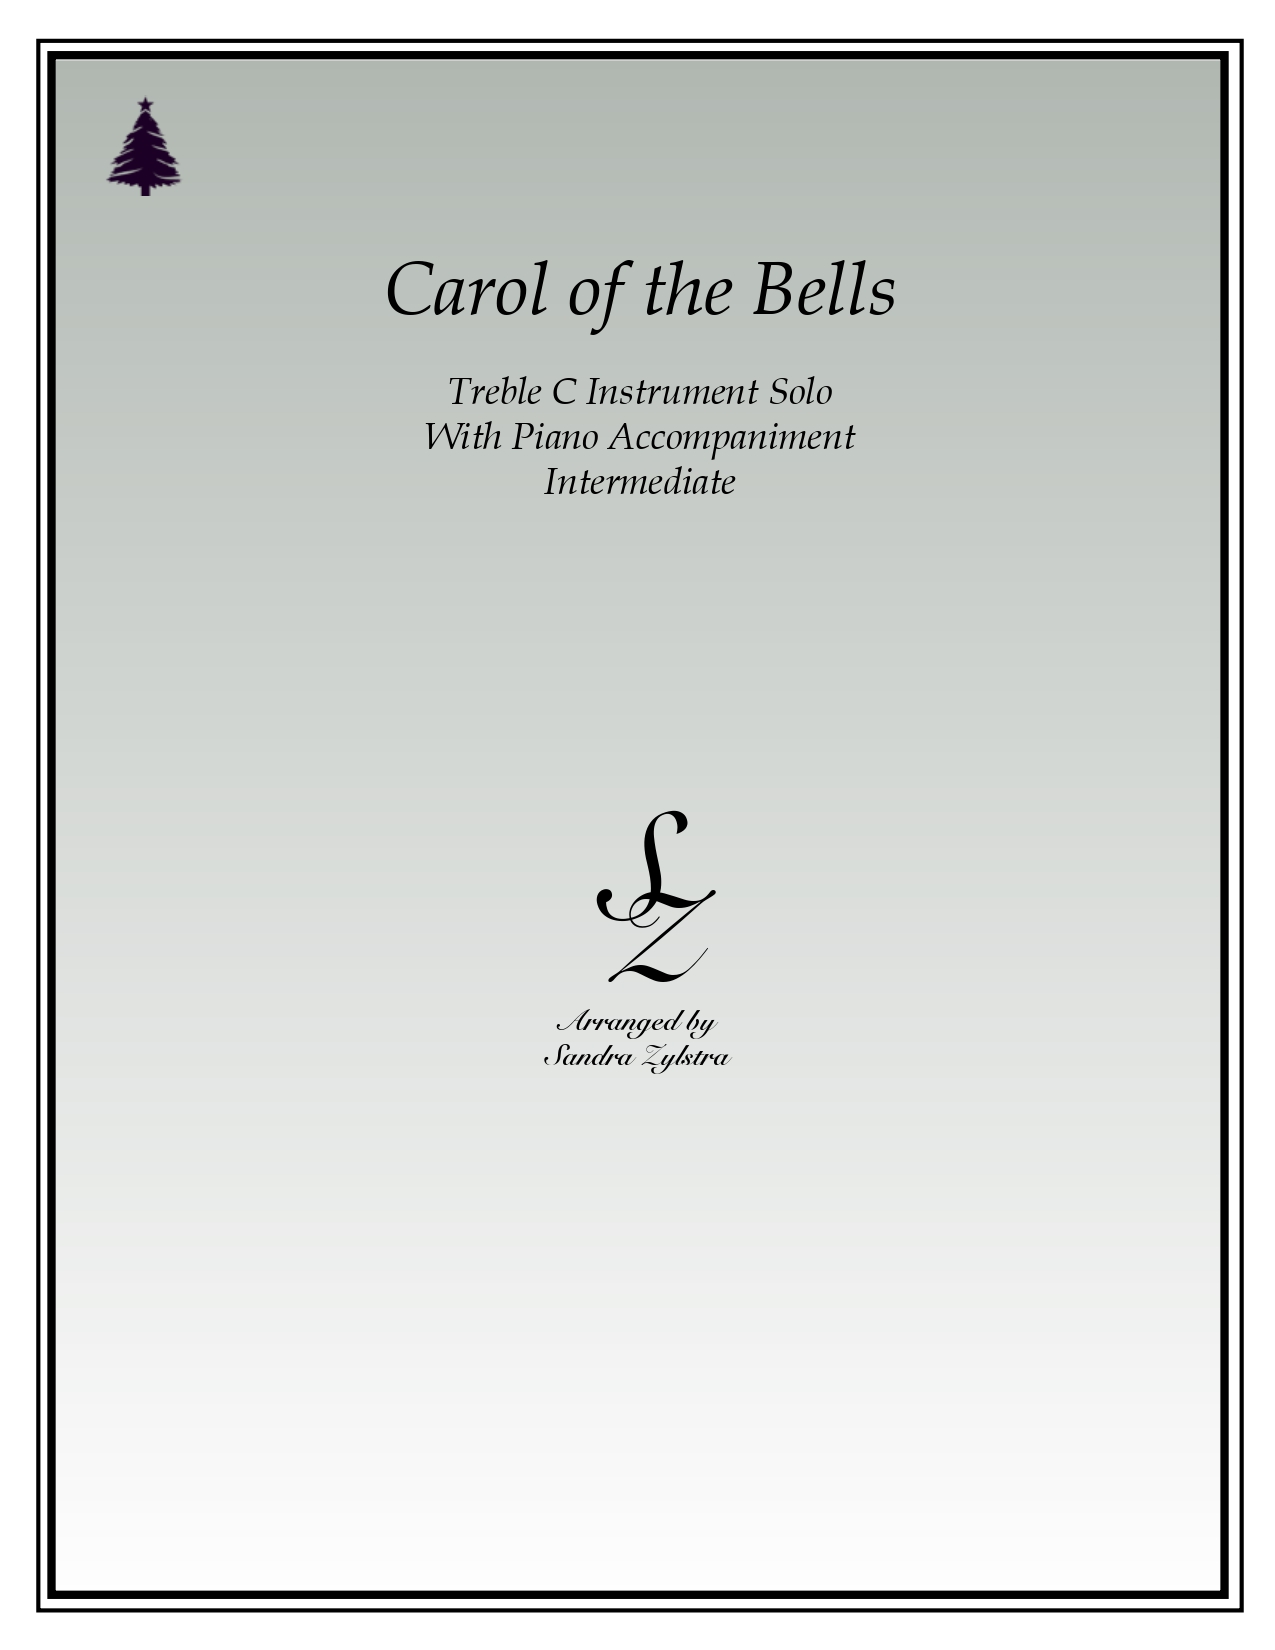 Carol Of The Bells treble C instrument solo part cover page 00011